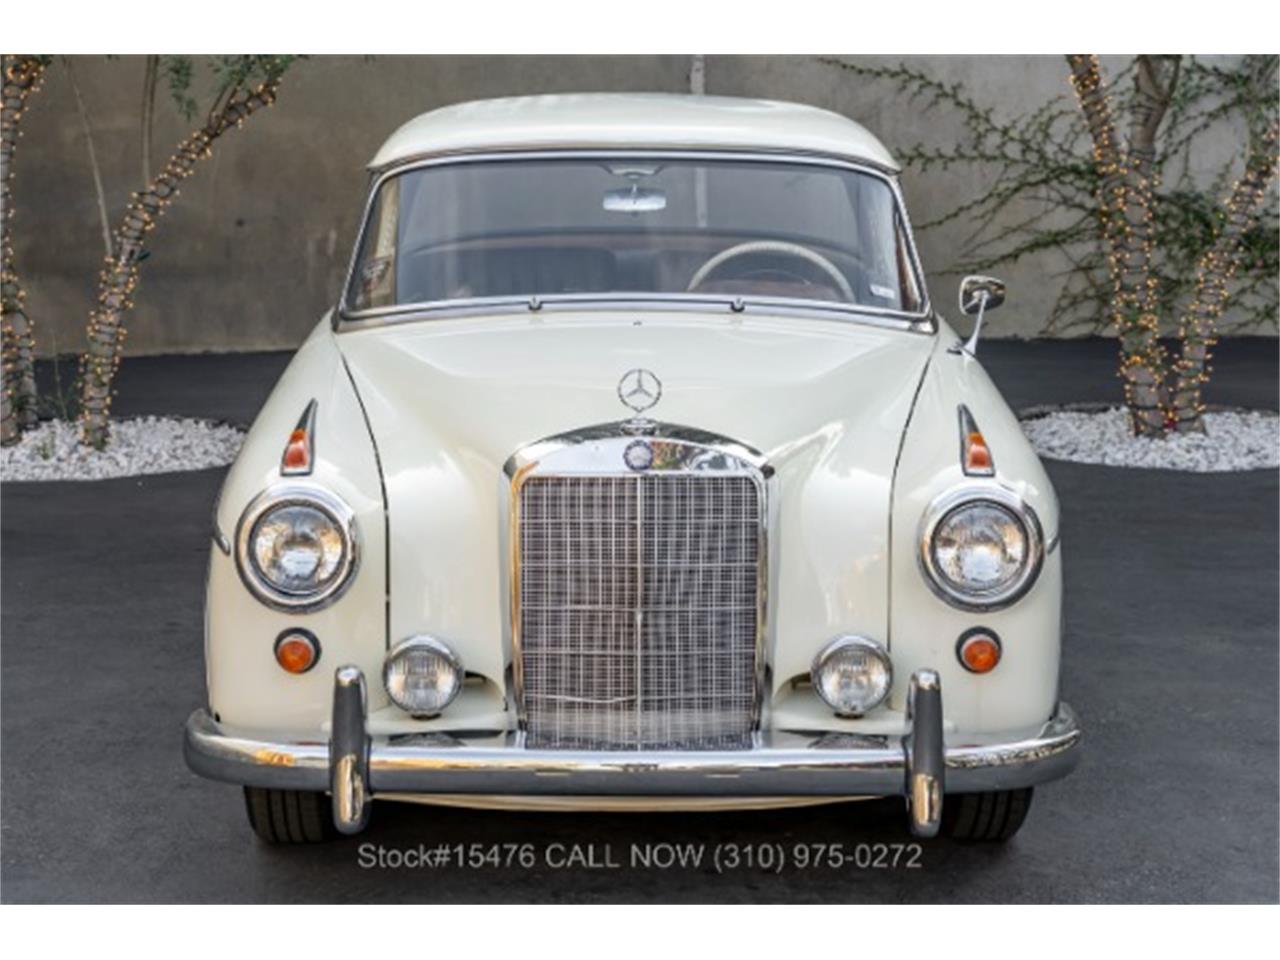 For Sale: 1960 Mercedes-Benz 220SE in Beverly Hills, California for sale in Beverly Hills, CA